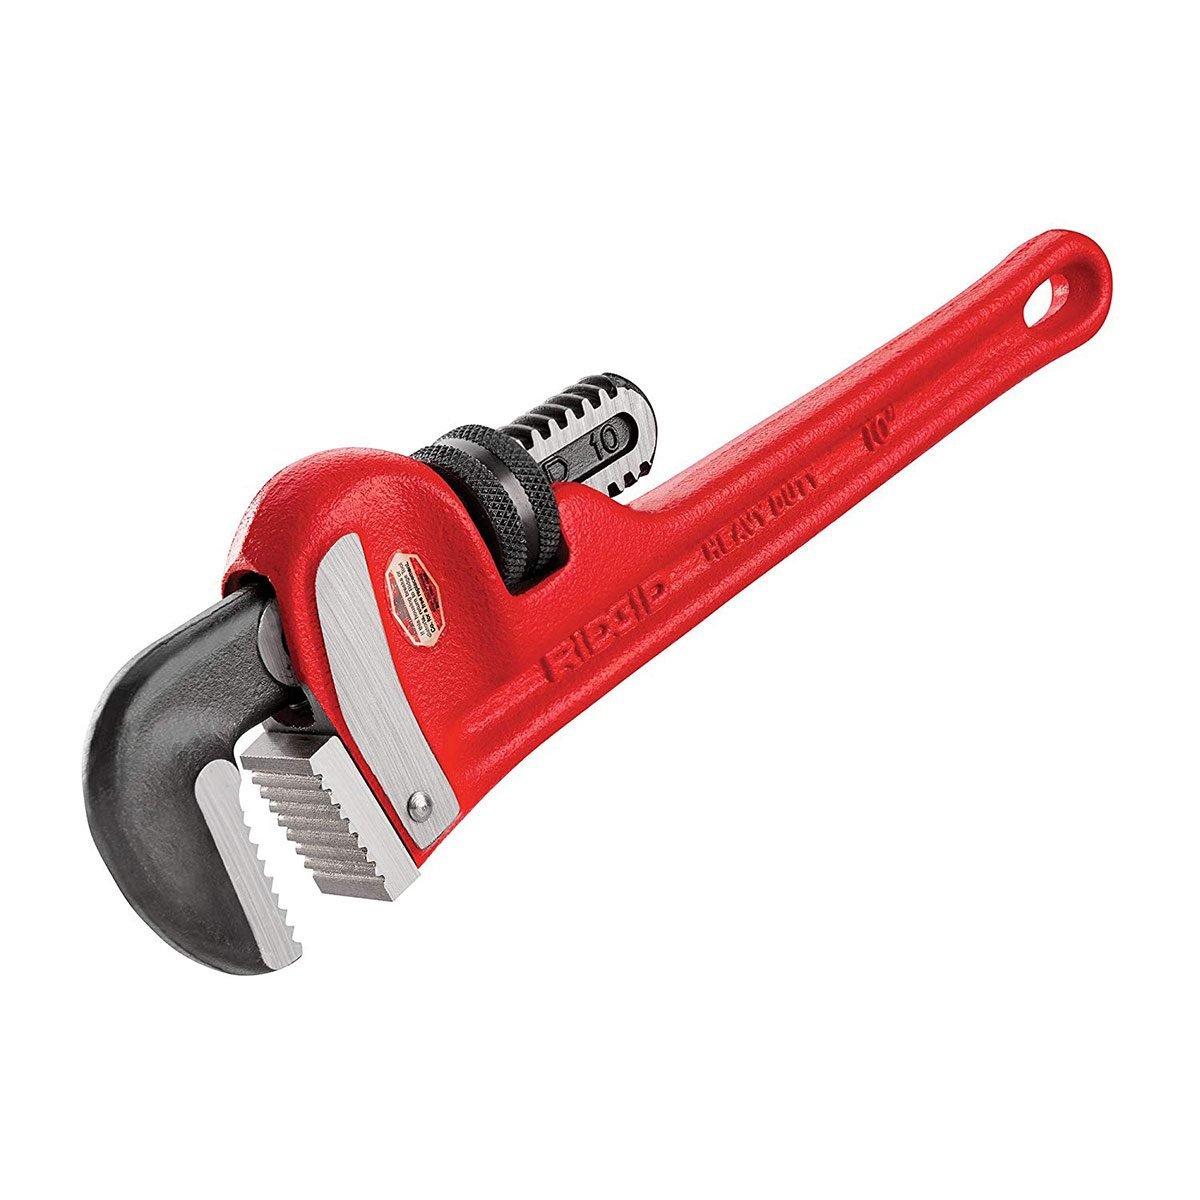 What is a Pipe Wrench?